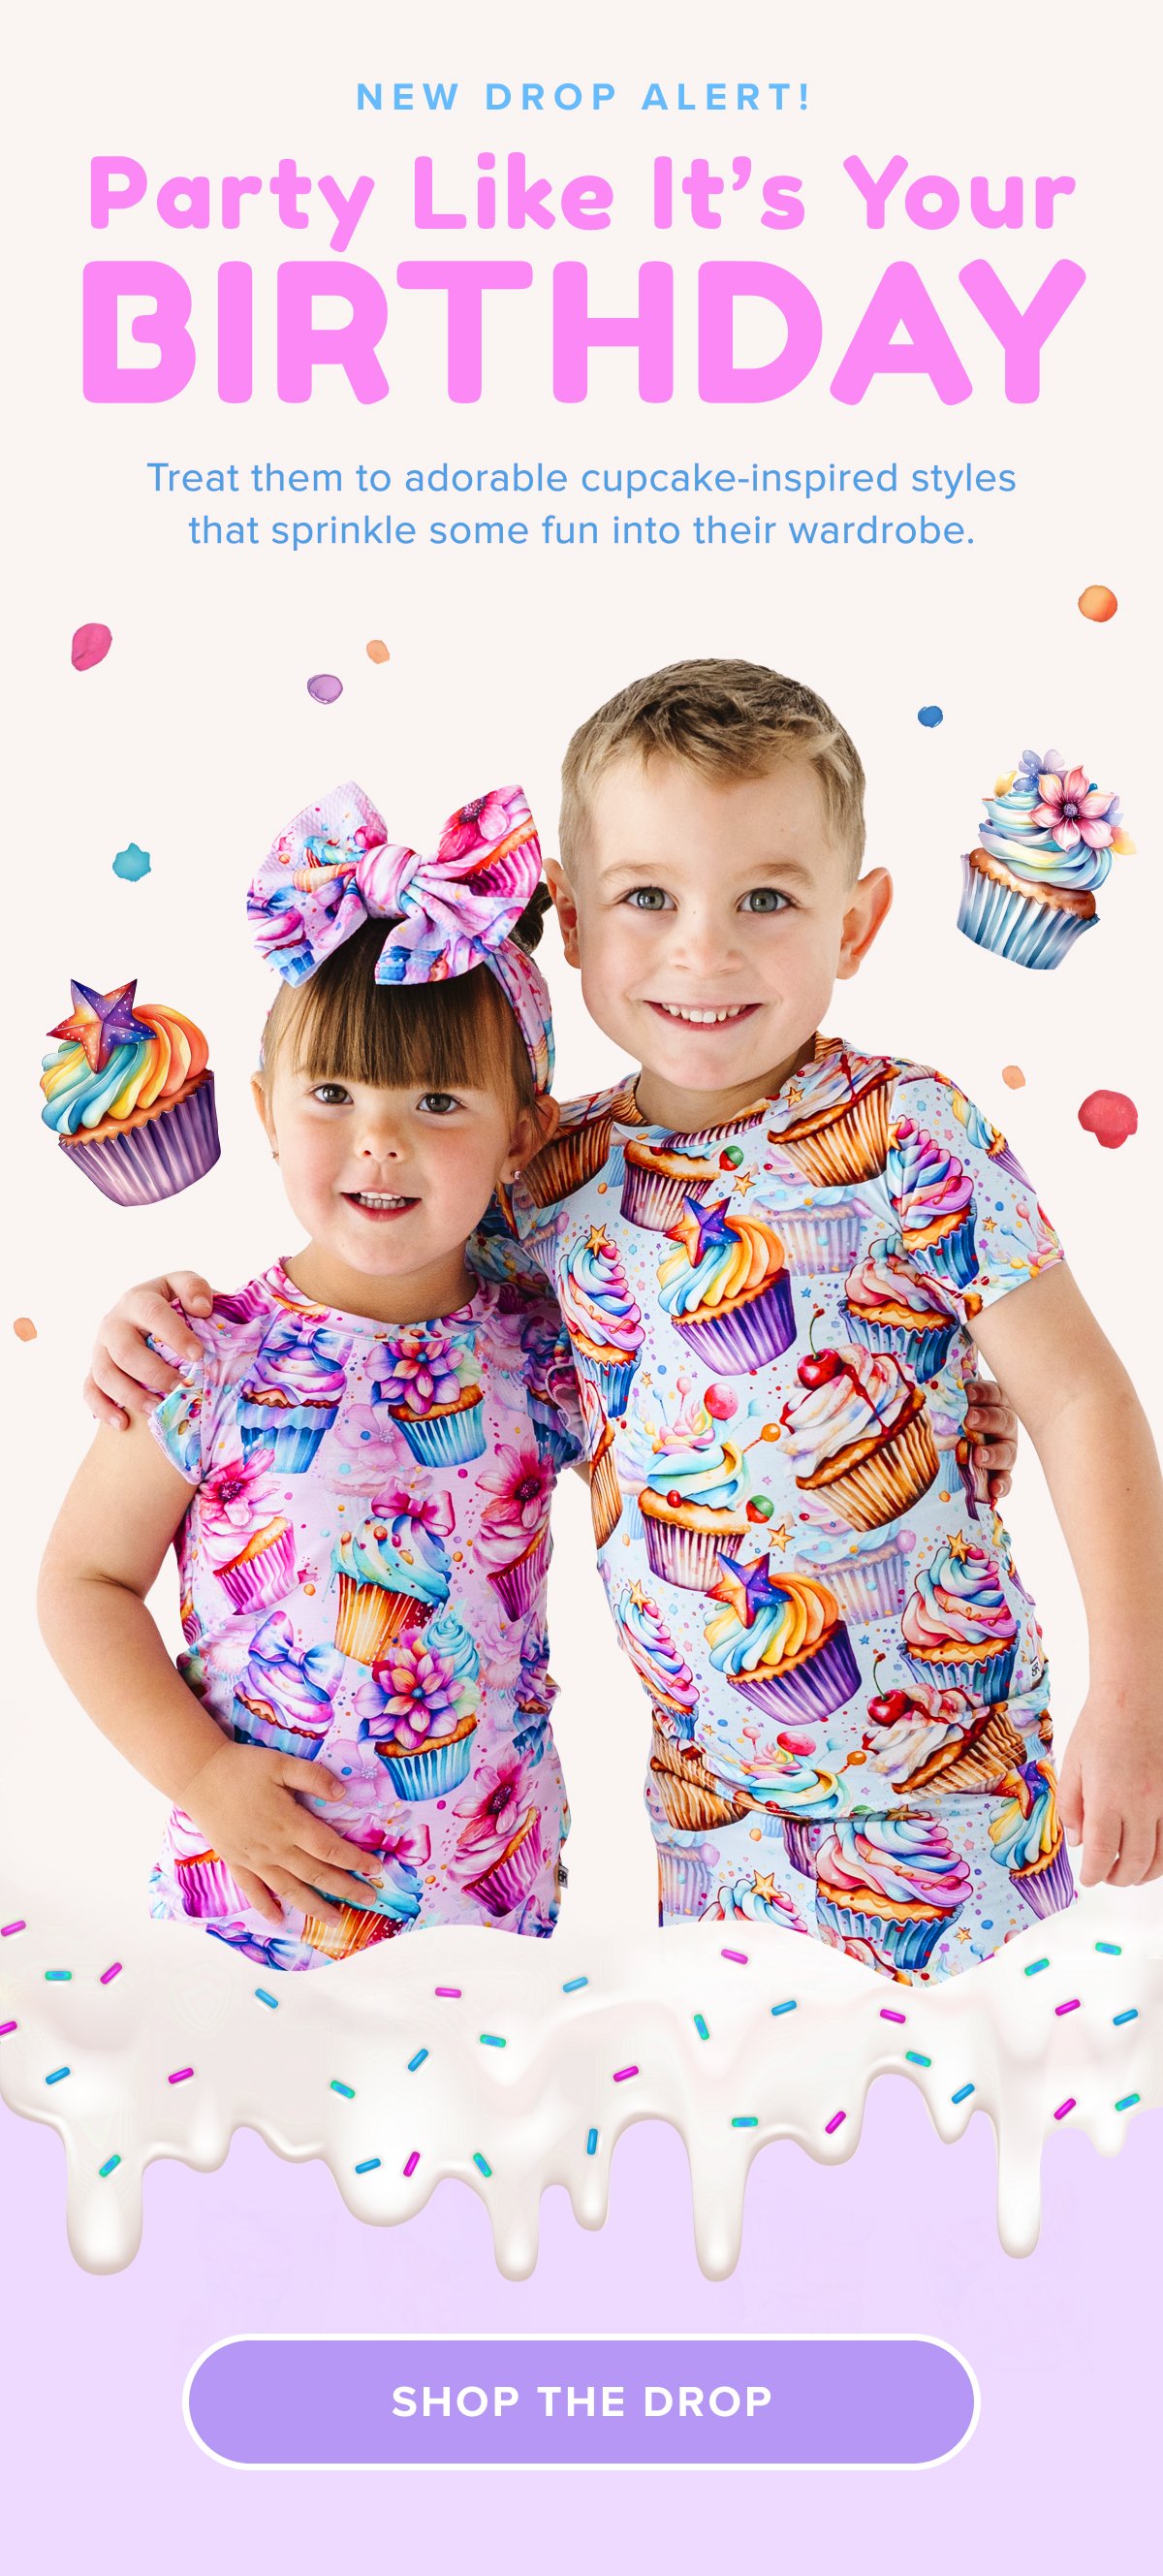 Party Like It’s Your BIRTHDAY Treat them to adorable cupcake-inspired styles that sprinkle some fun into your little one’s wardrobe.